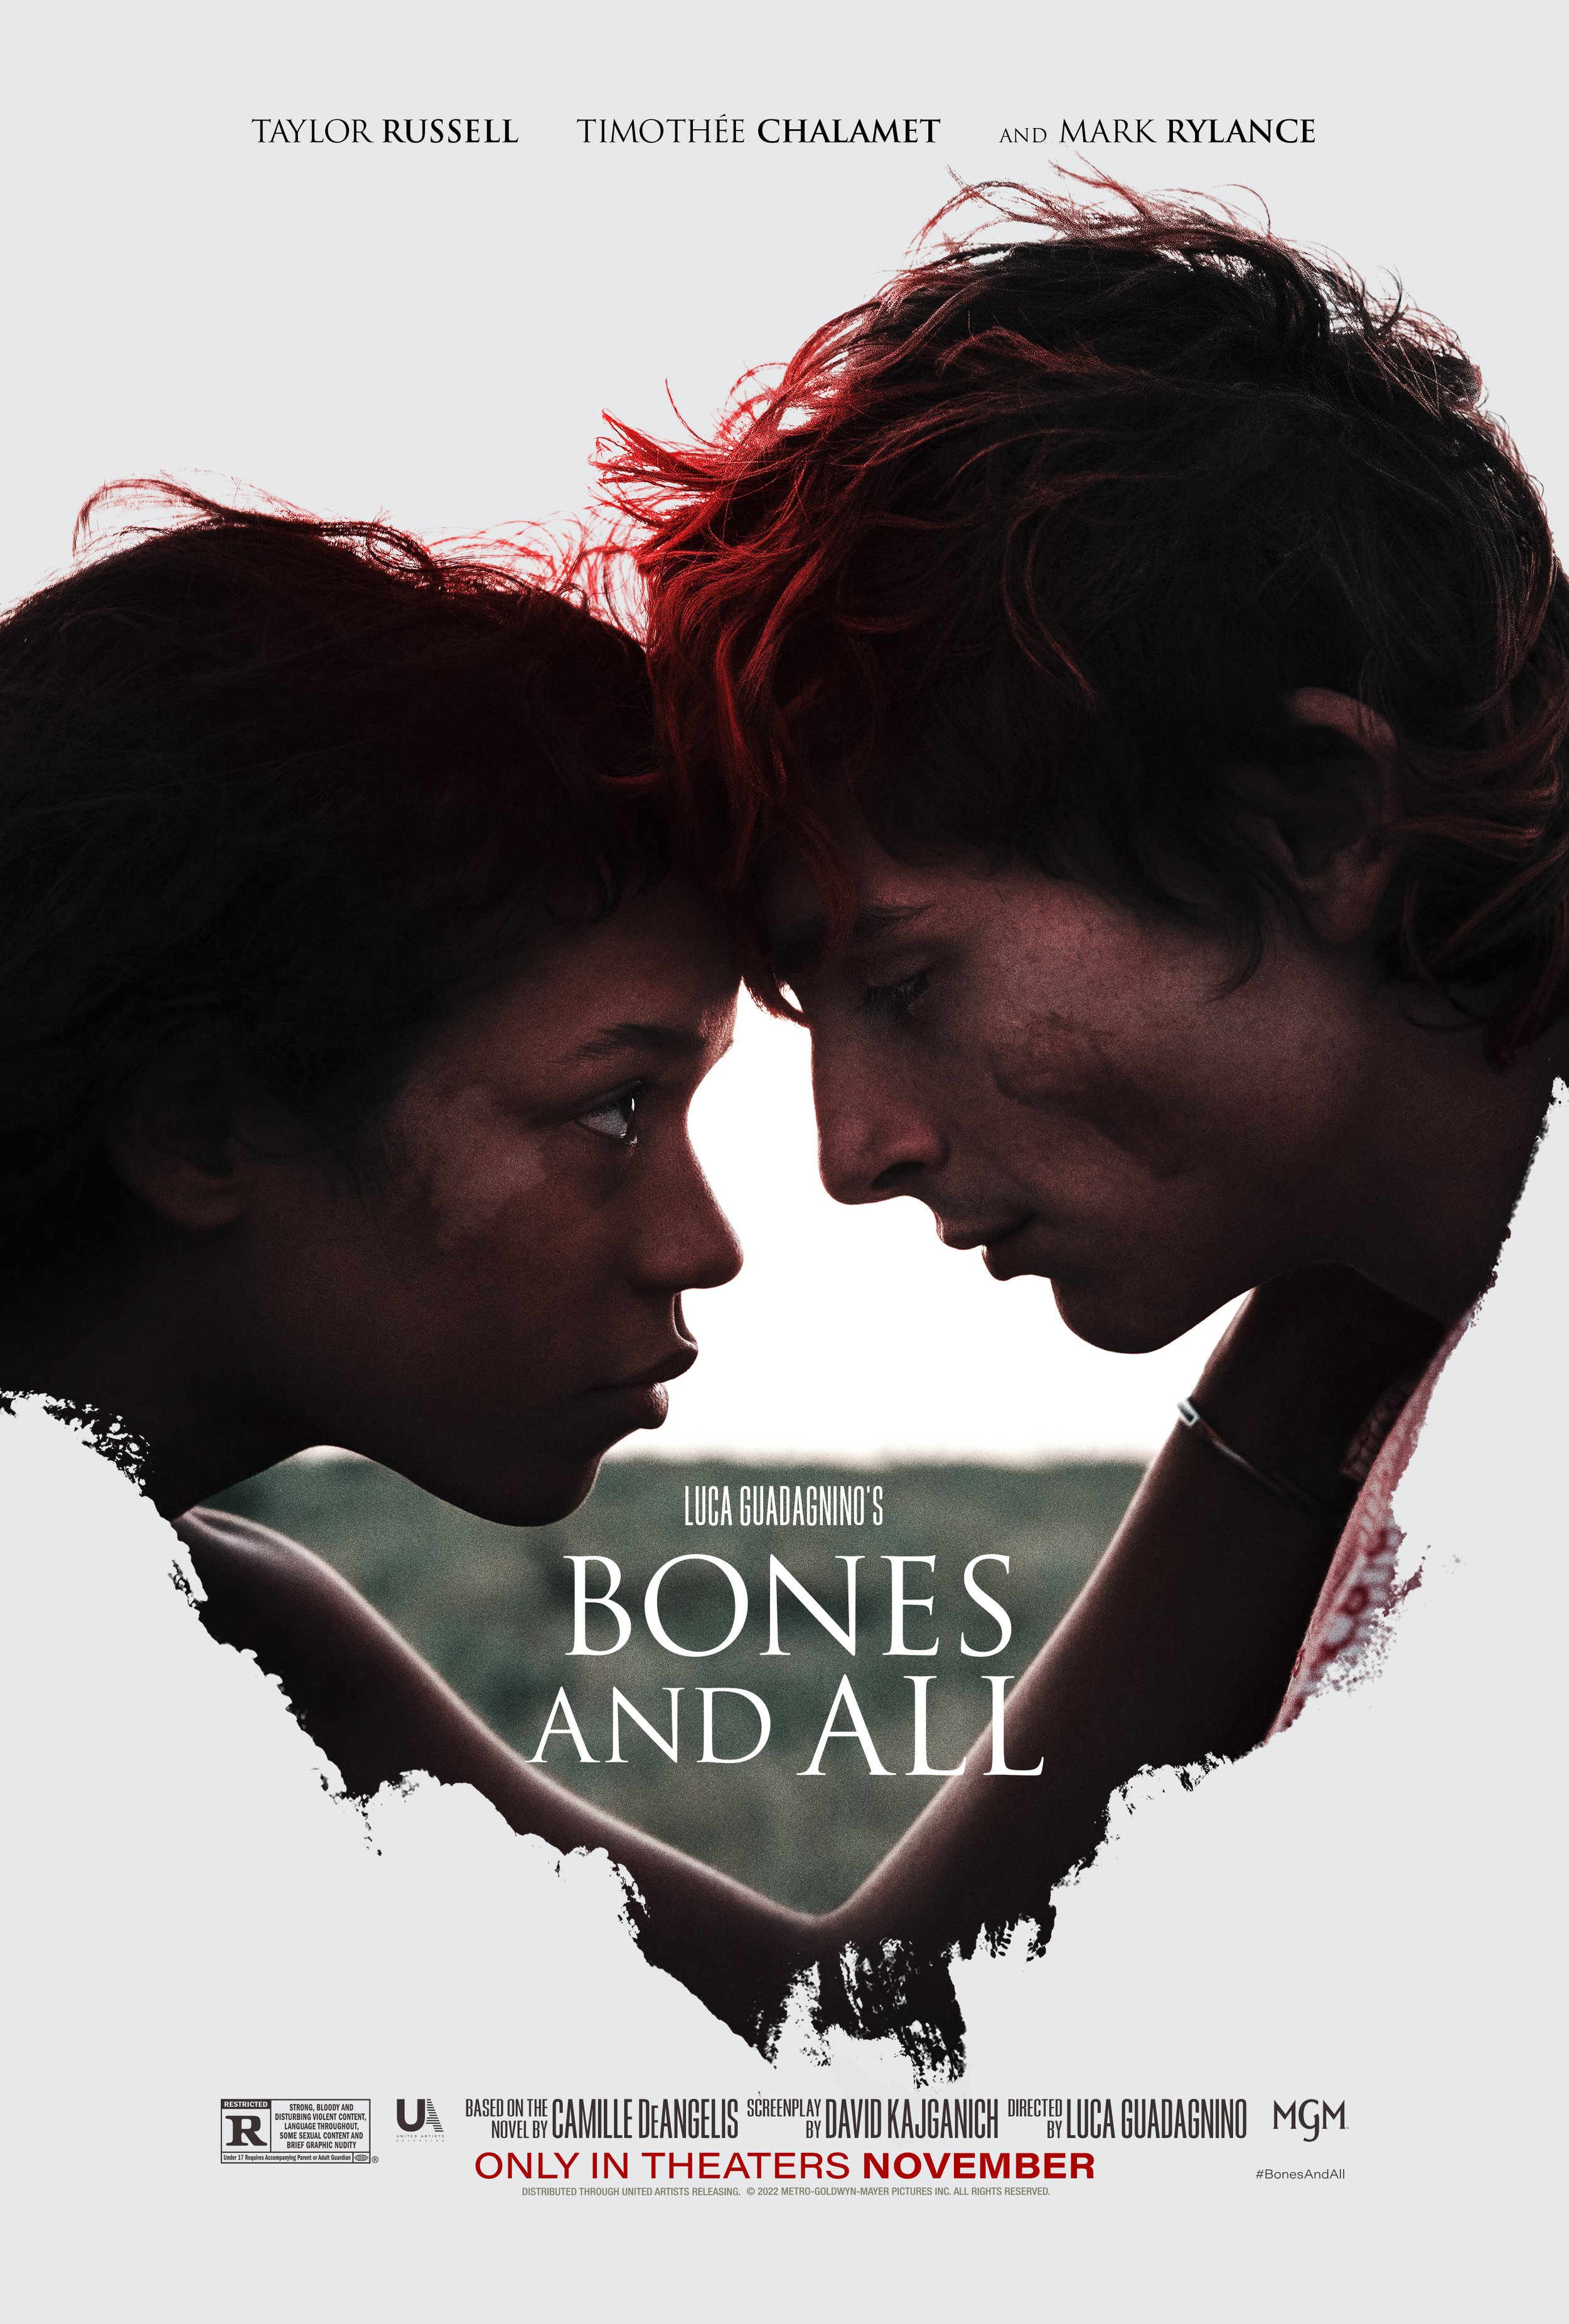 Bones And All image © Universal Releasing